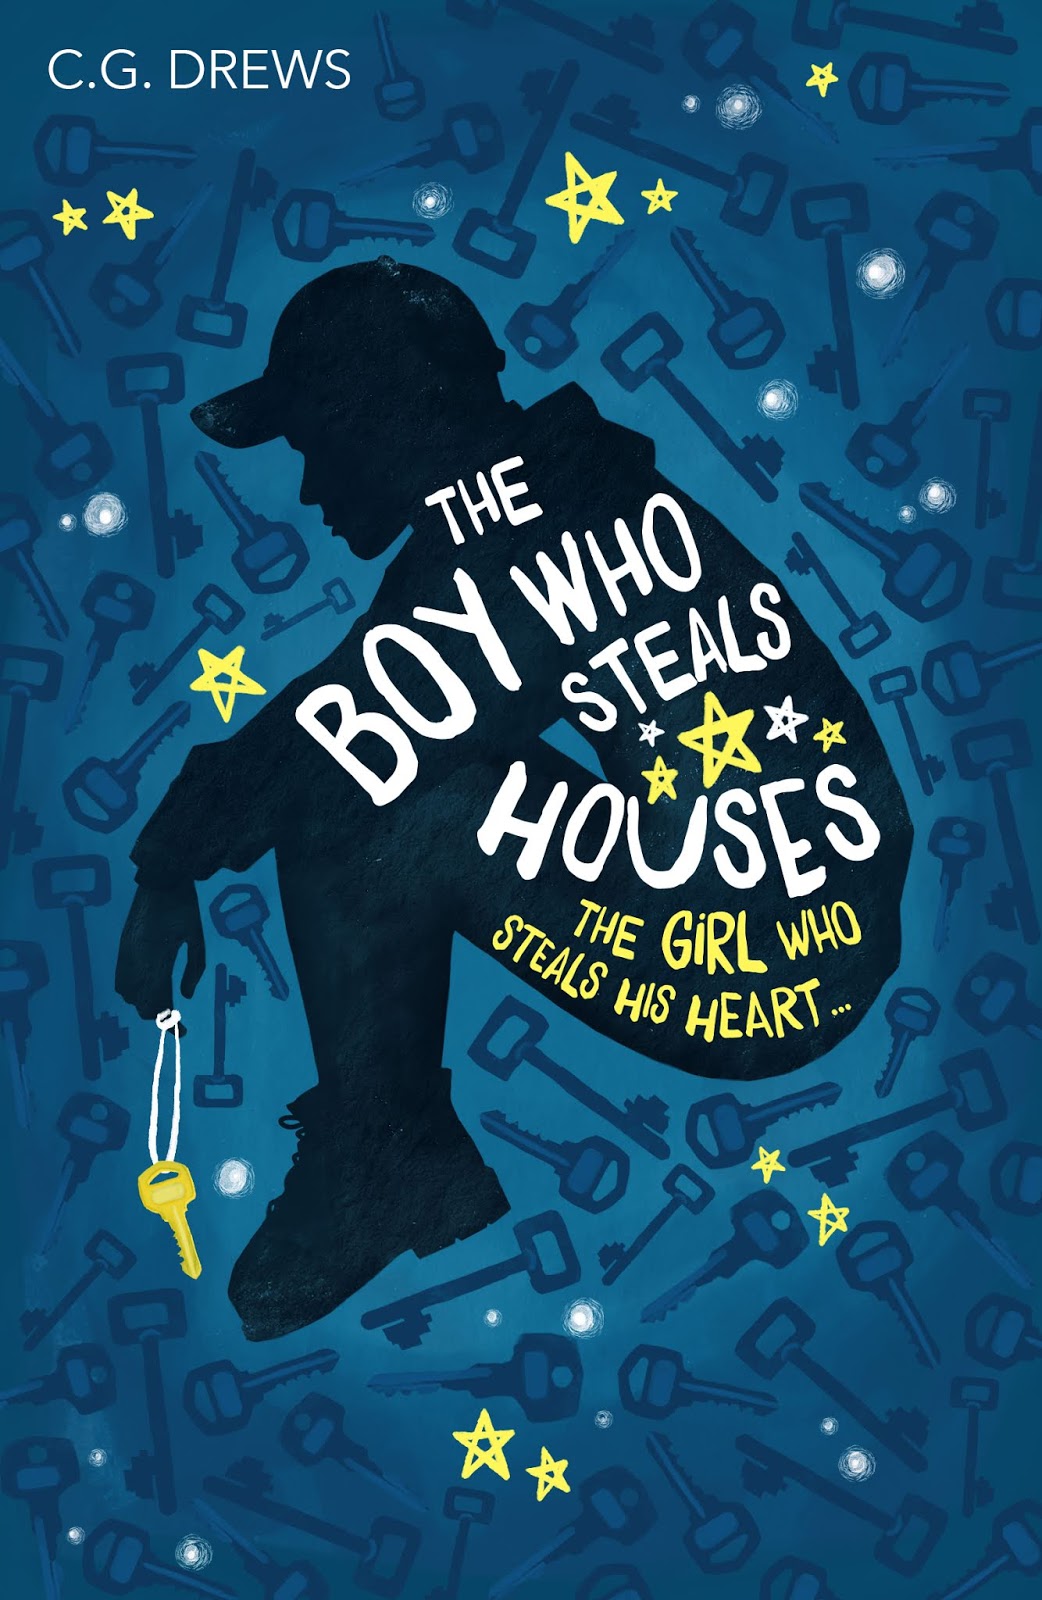 The Boy Who Steals Houses by C. G. Drews